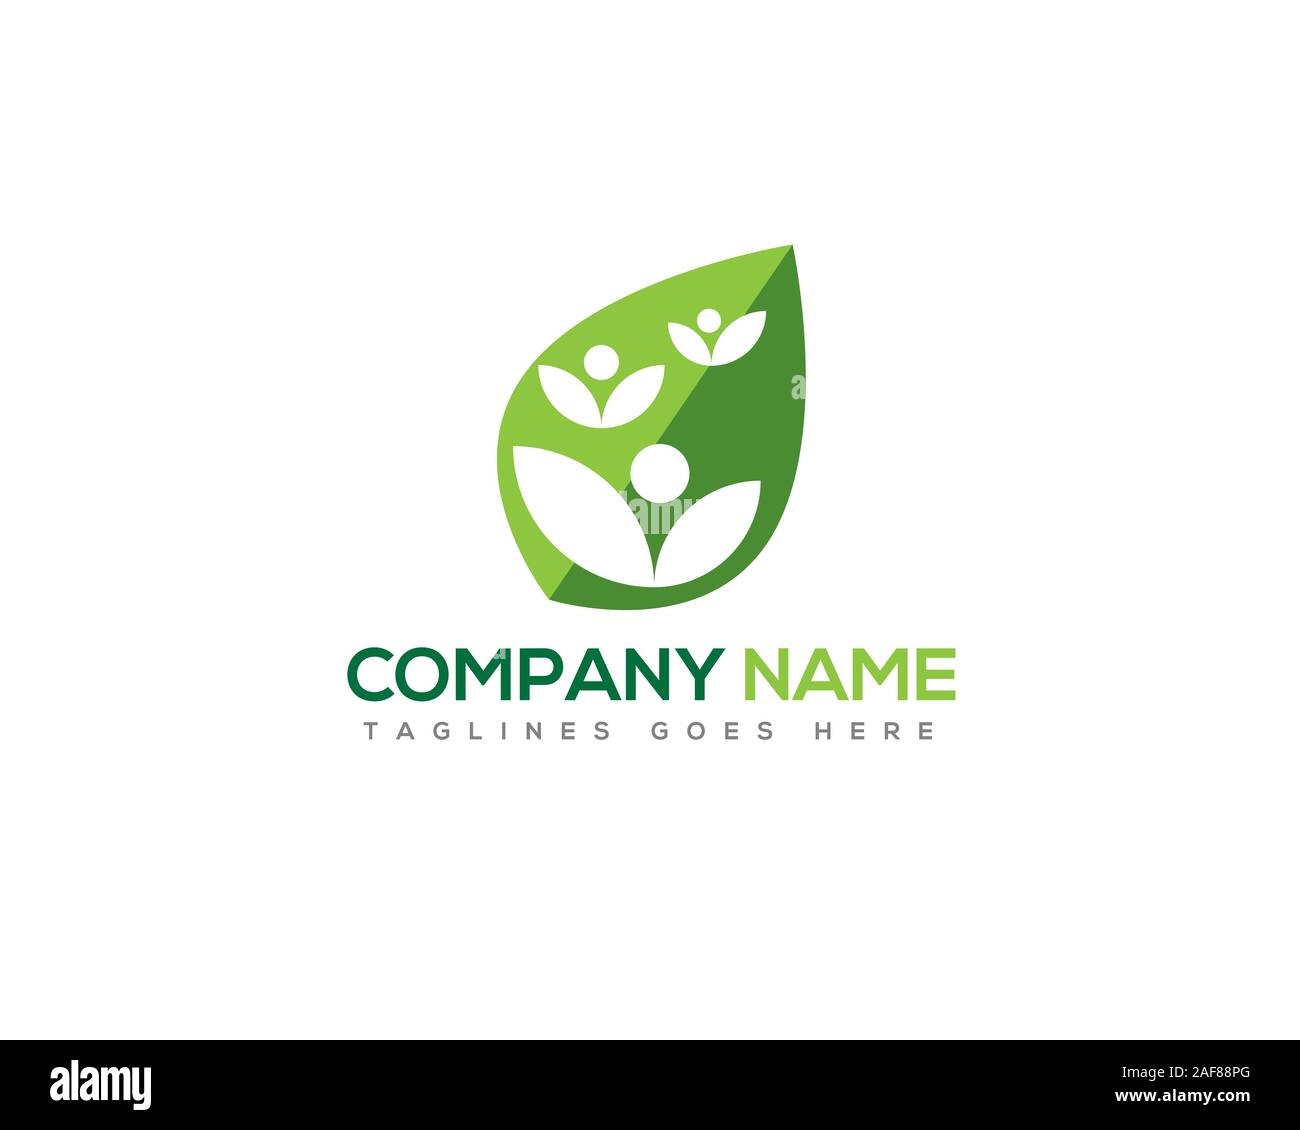 flower leaf people company name logo Stock Vector